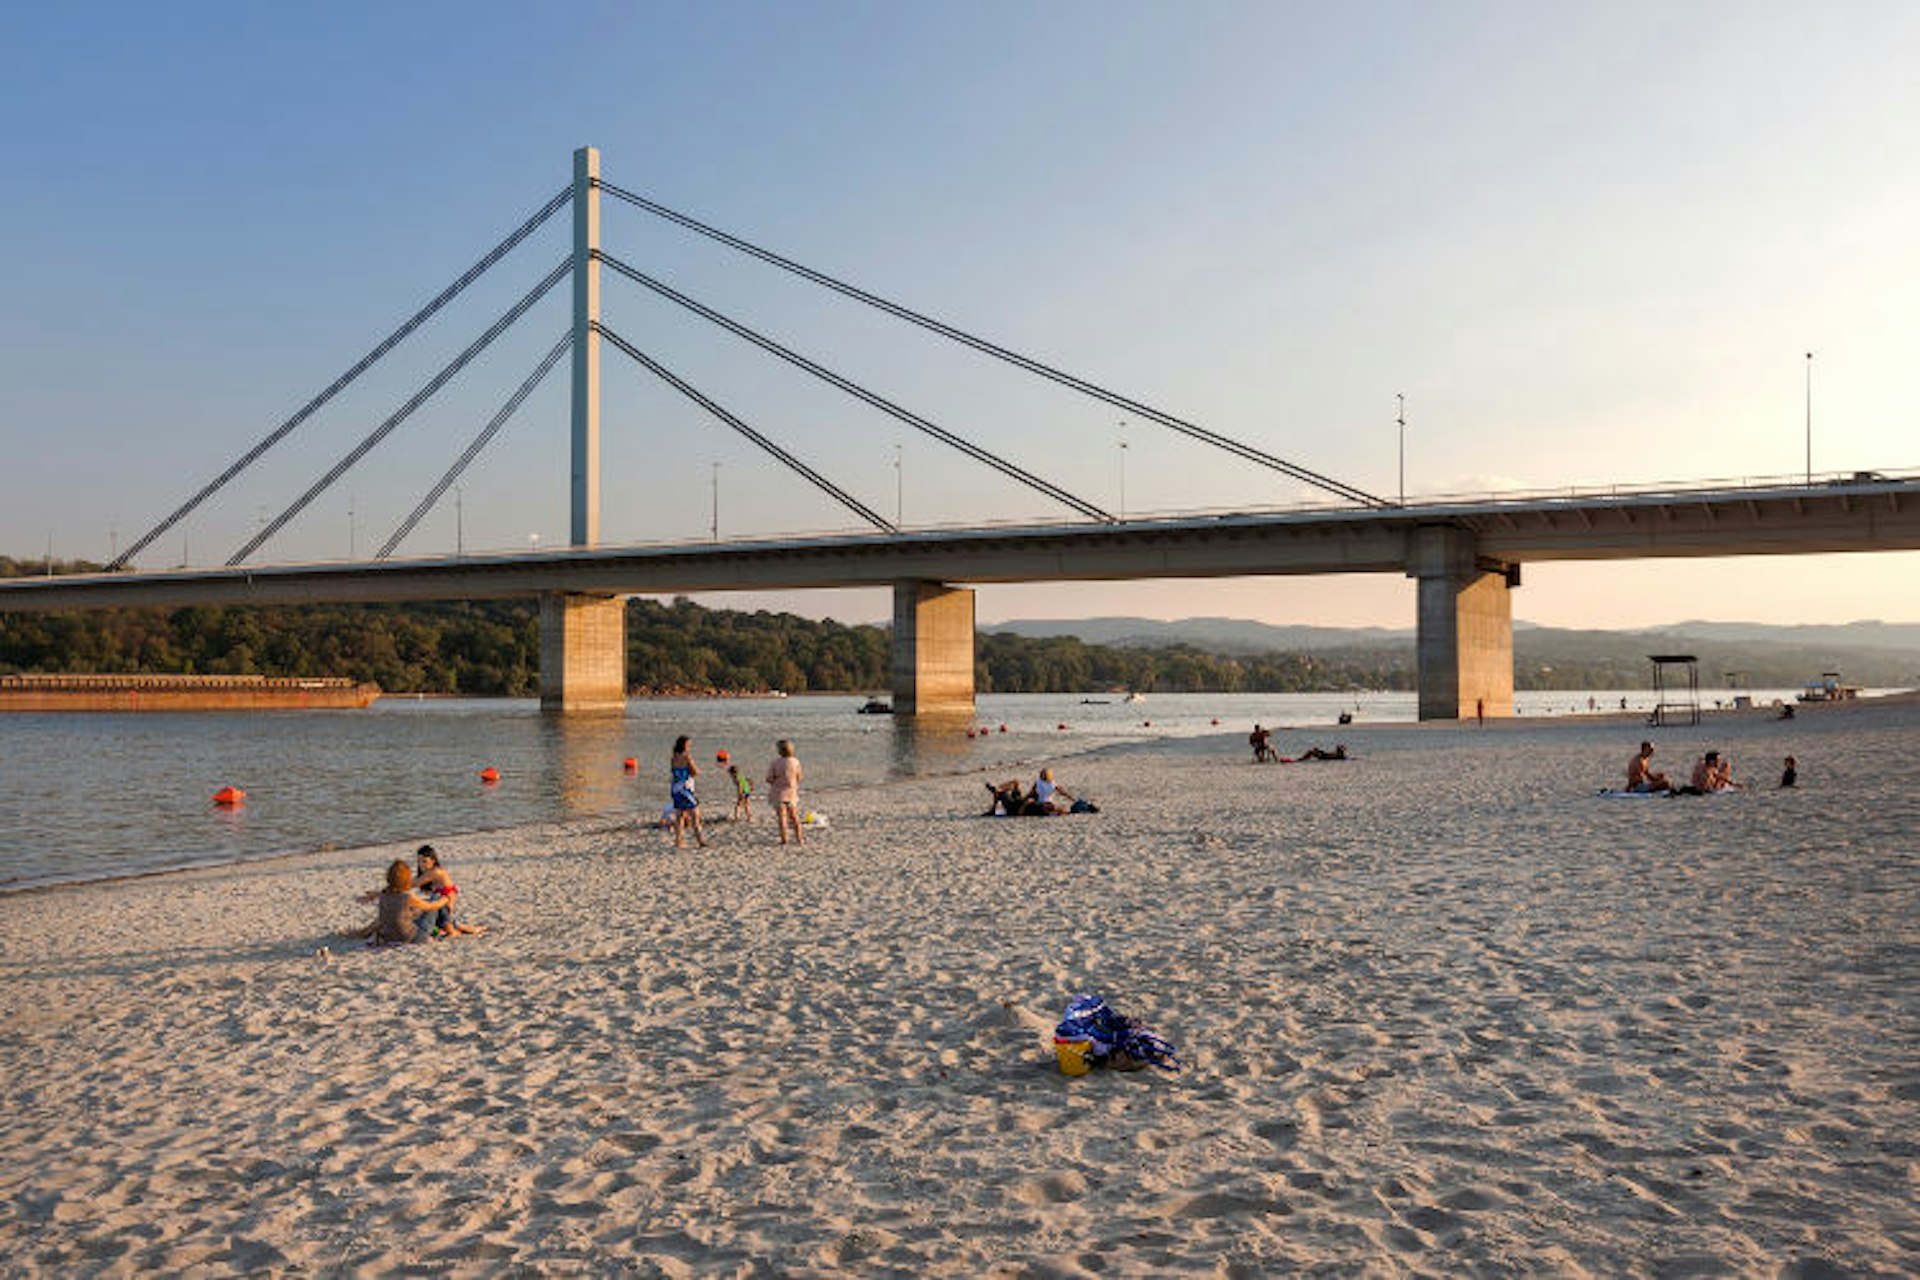 Summer at Novi Sad’s Štrand beach on the Danube © John Freeman / Lonely Planet Images / Getty Images